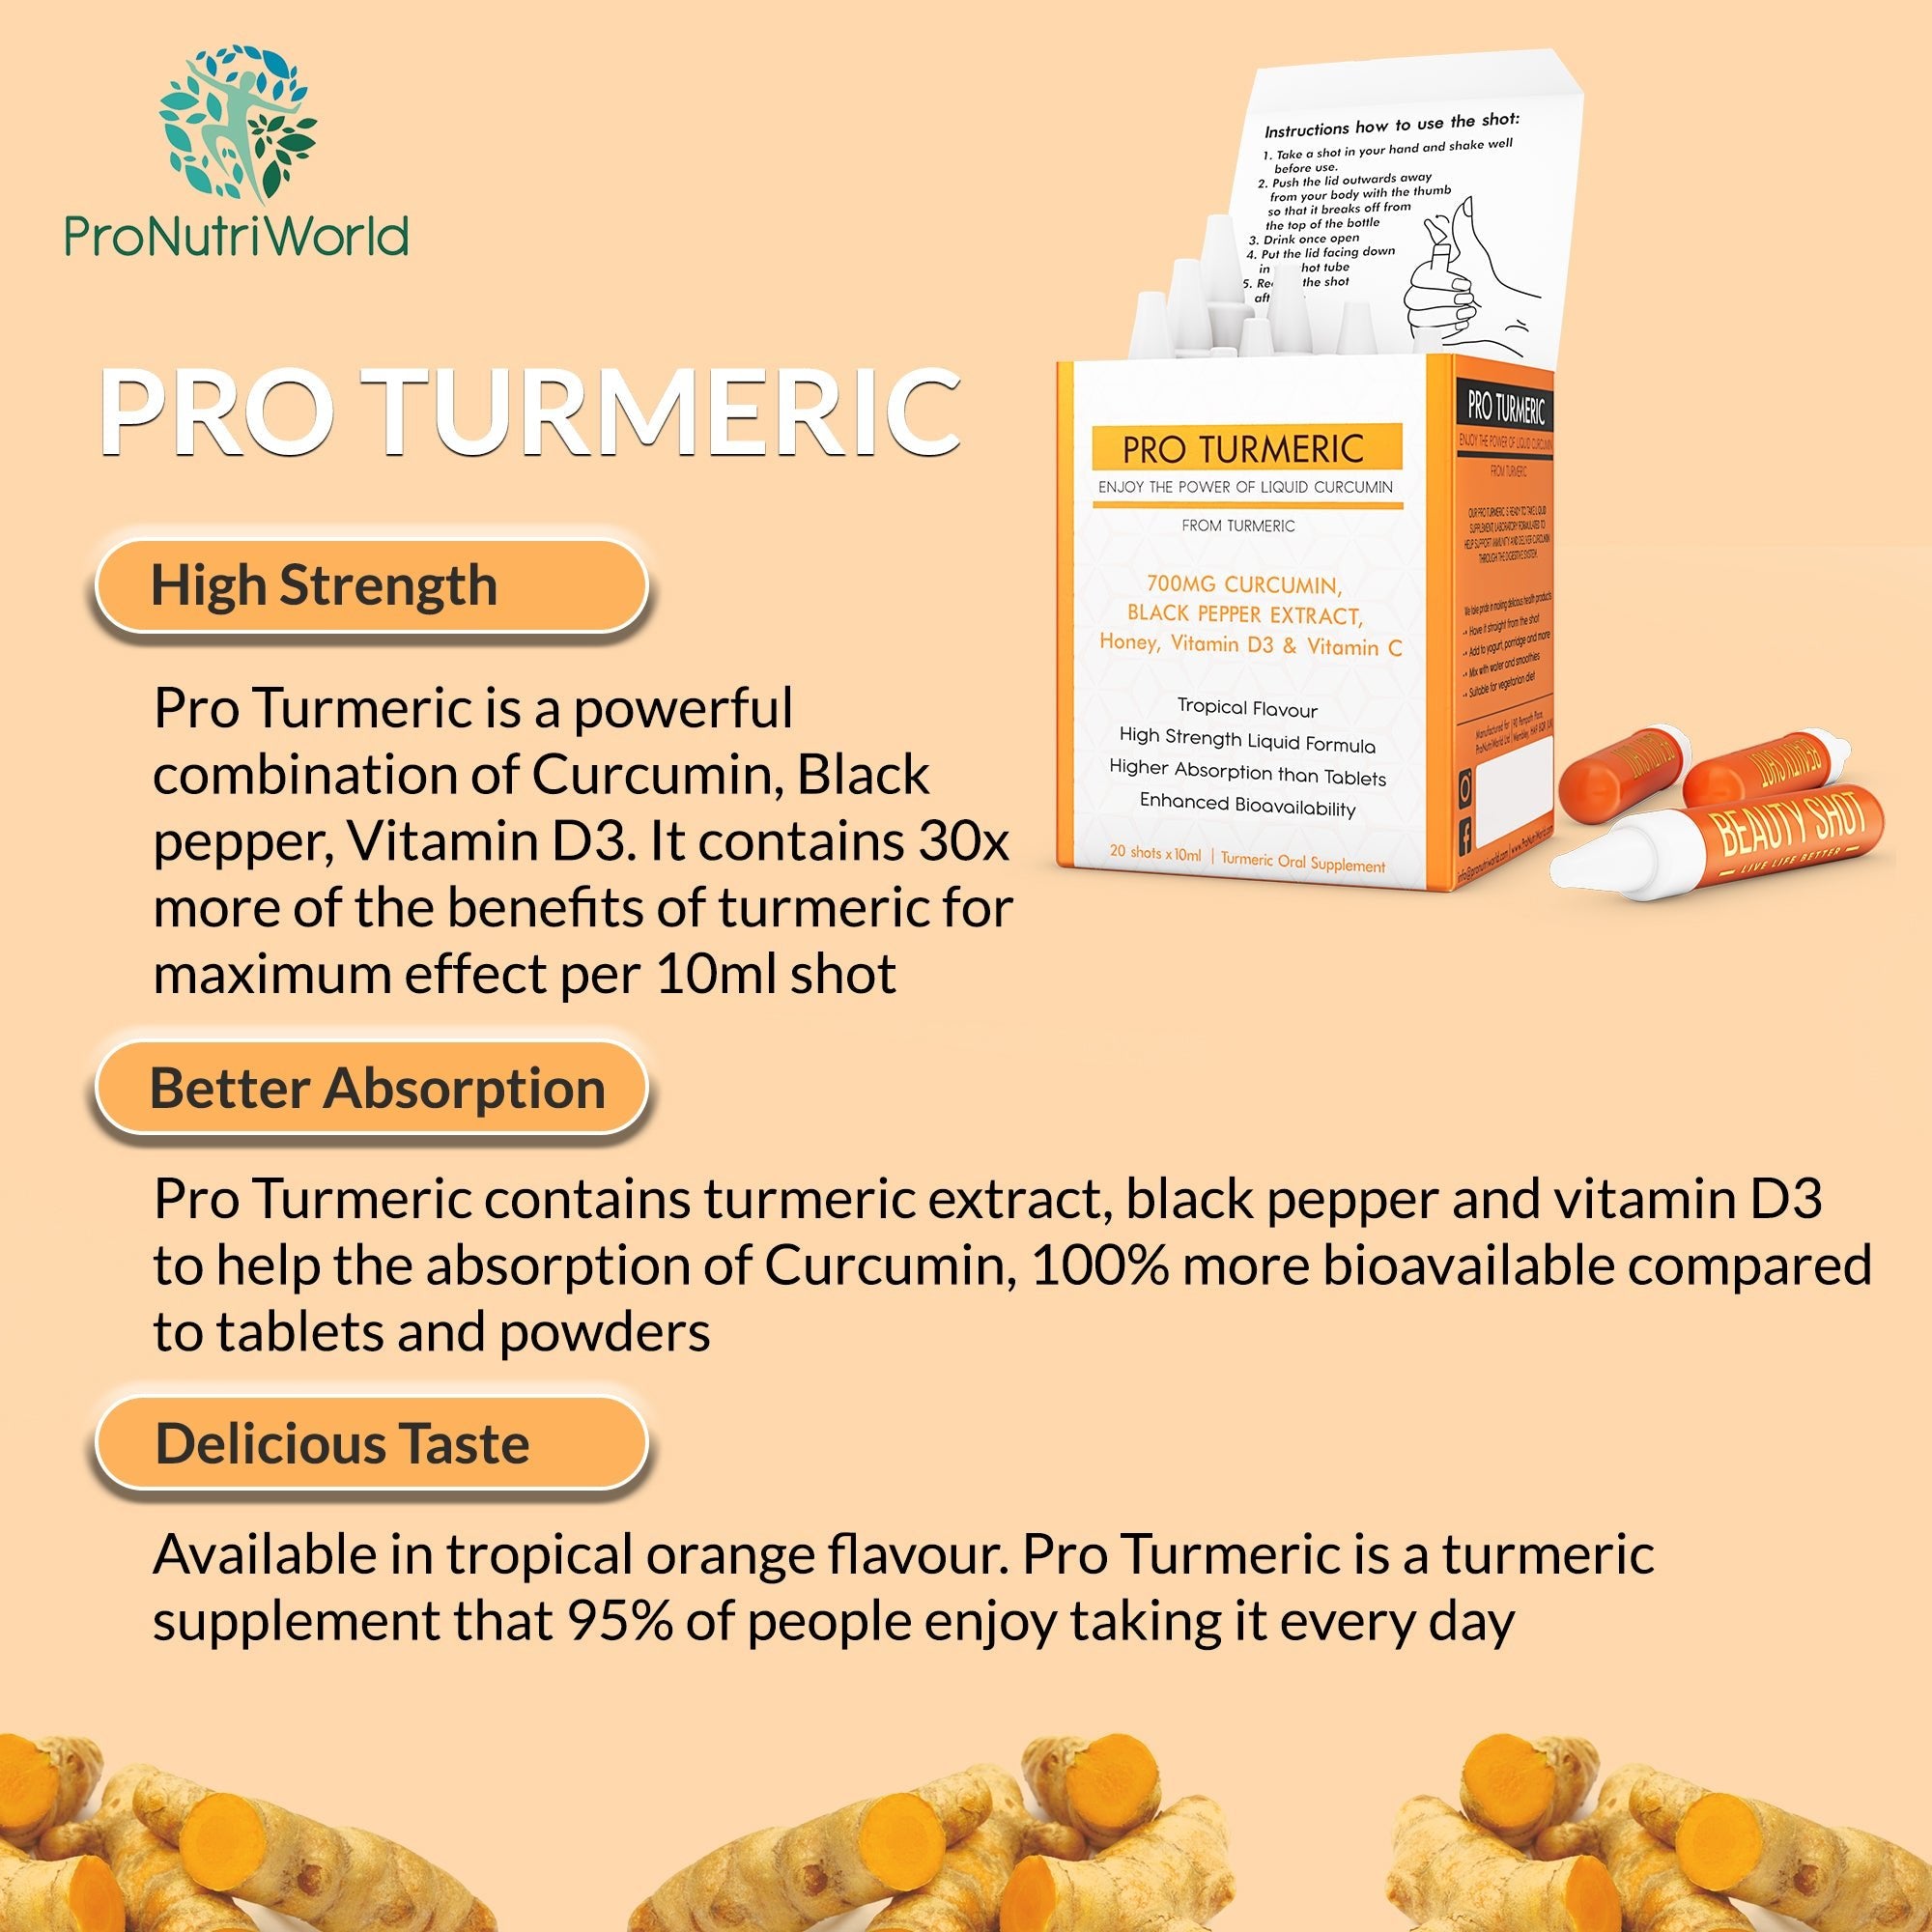 &lt;img src=&quot;pic.gif&quot; alt=&quot;Pro Turmeric is a powerful combination of curcumin and black pepper and vitamin d&quot; /&gt;